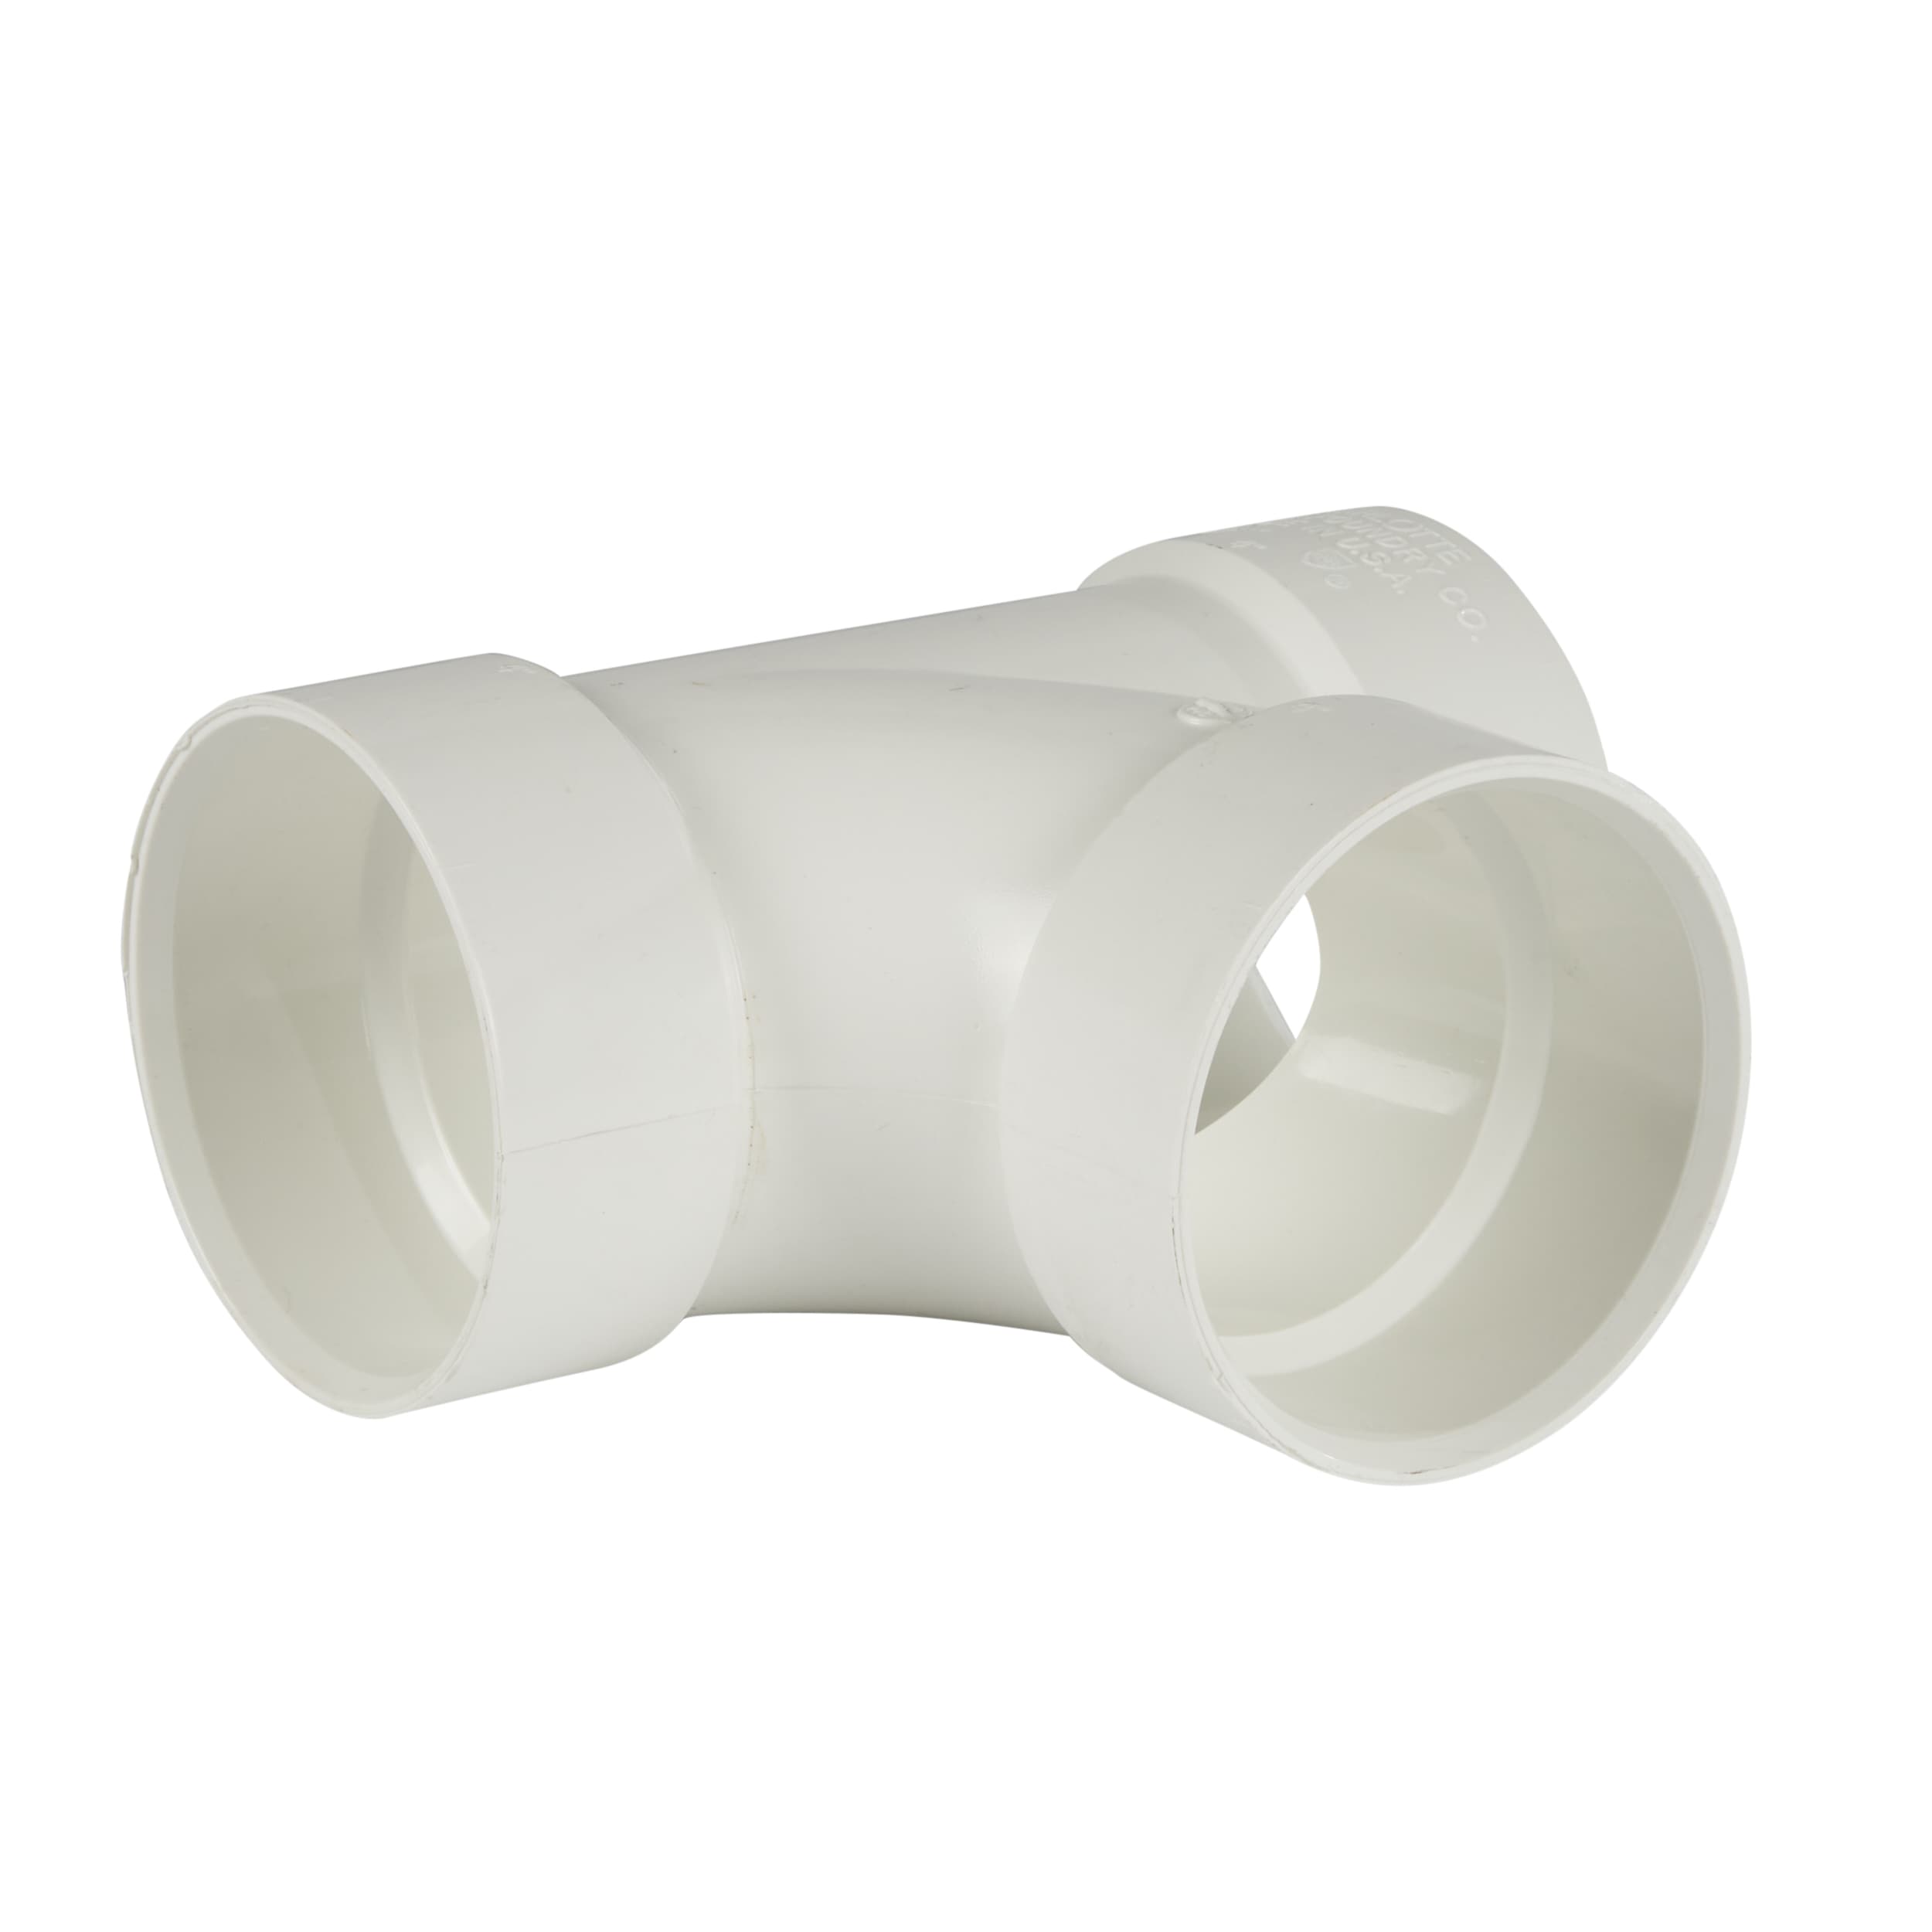 Waste pipe fittings tee pour 32mm 36mm x 10 for solvent weld waste pipe 